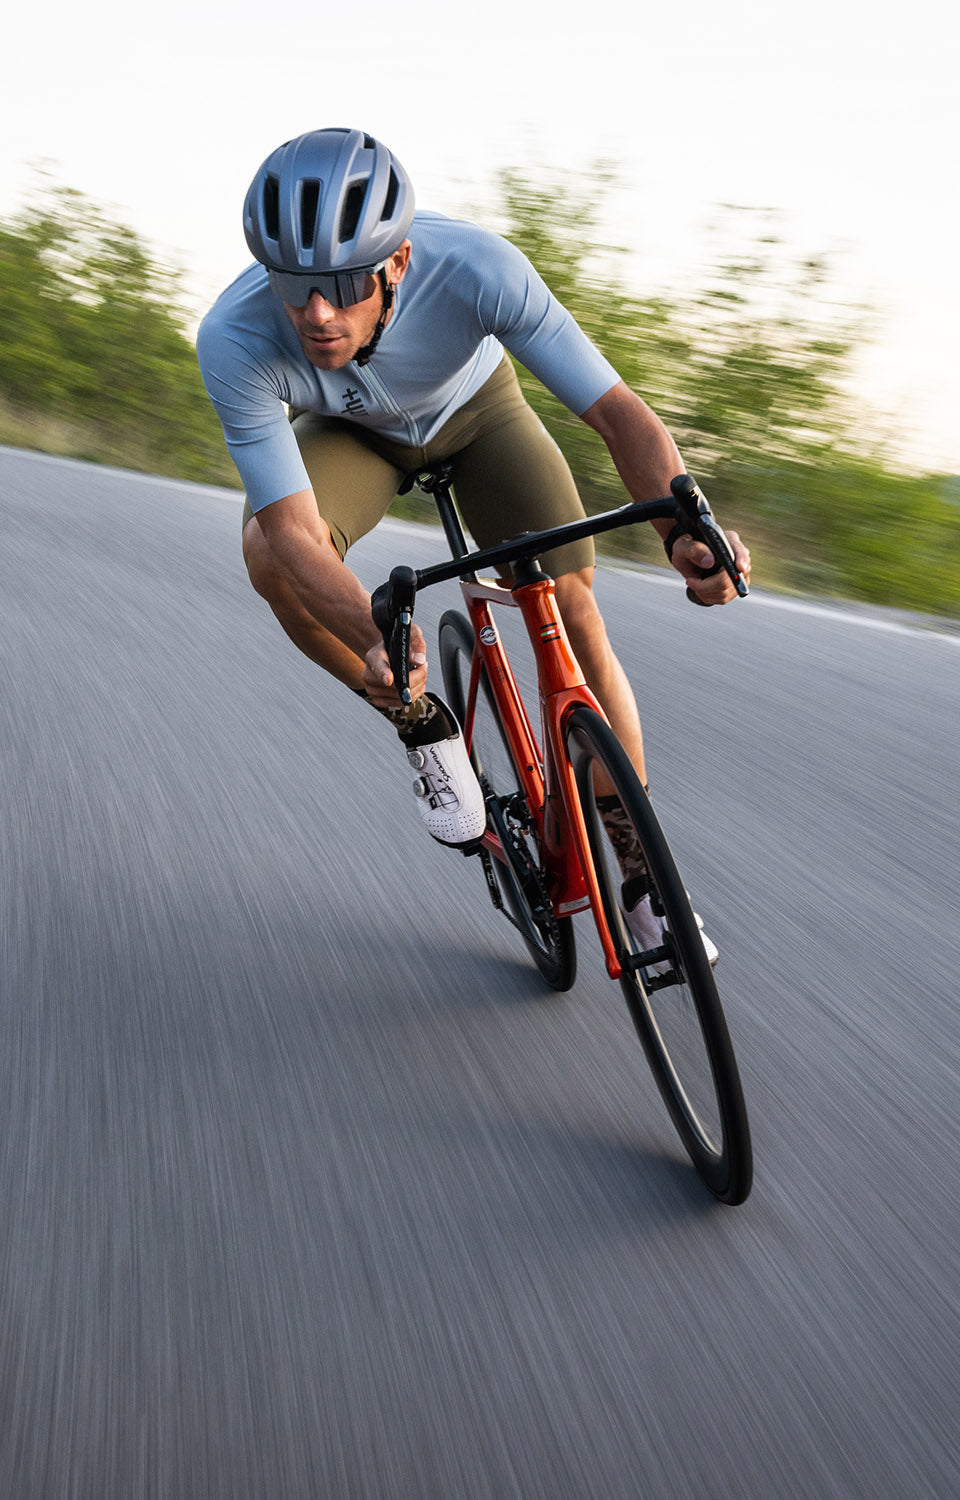 rh+: Technical Apparel for Cycling, Skiing, Outdoor | Official Site